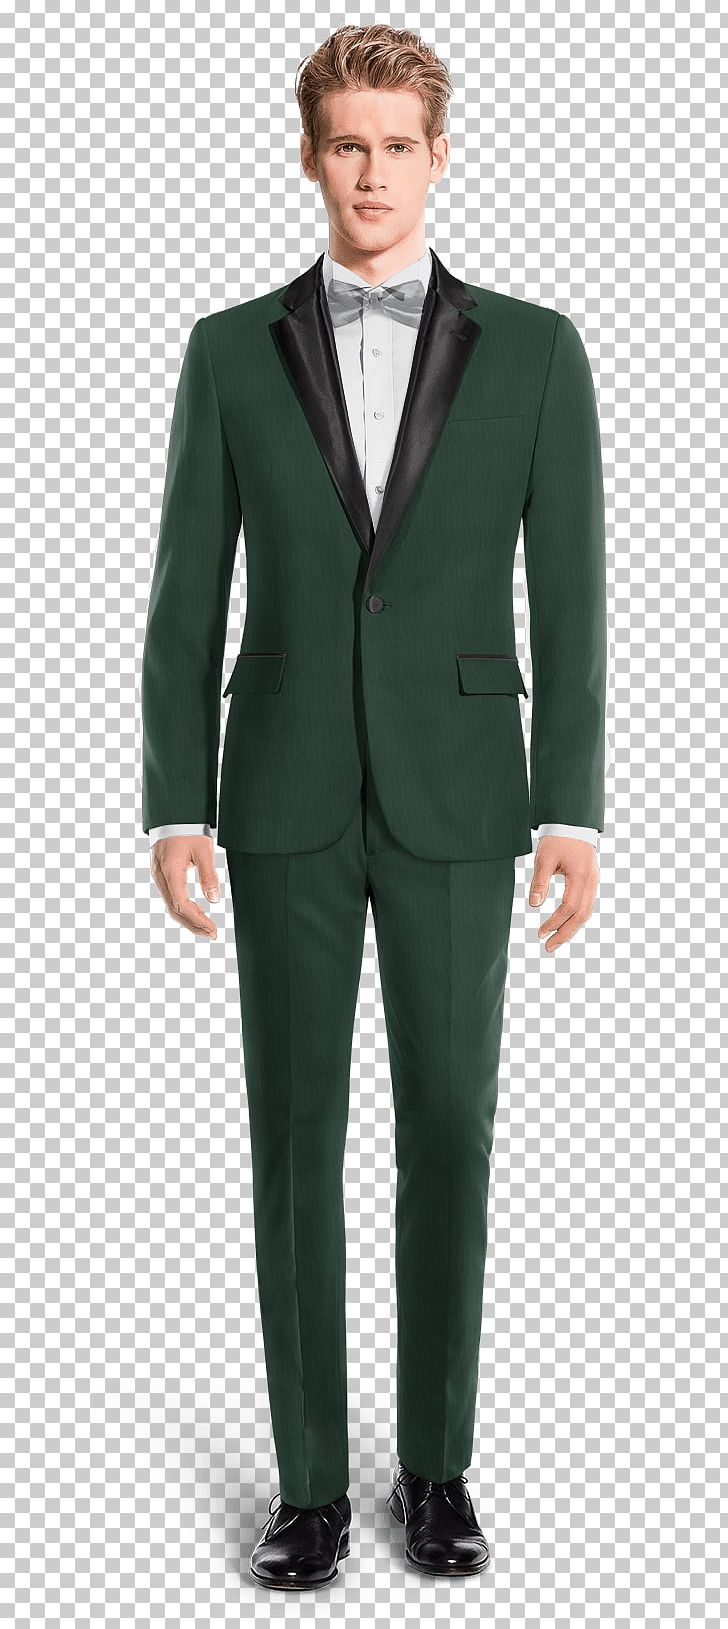 Suit Pants Tweed Dress Chino Cloth PNG, Clipart, Blazer, Businessperson, Chino Cloth, Costume, Doublebreasted Free PNG Download